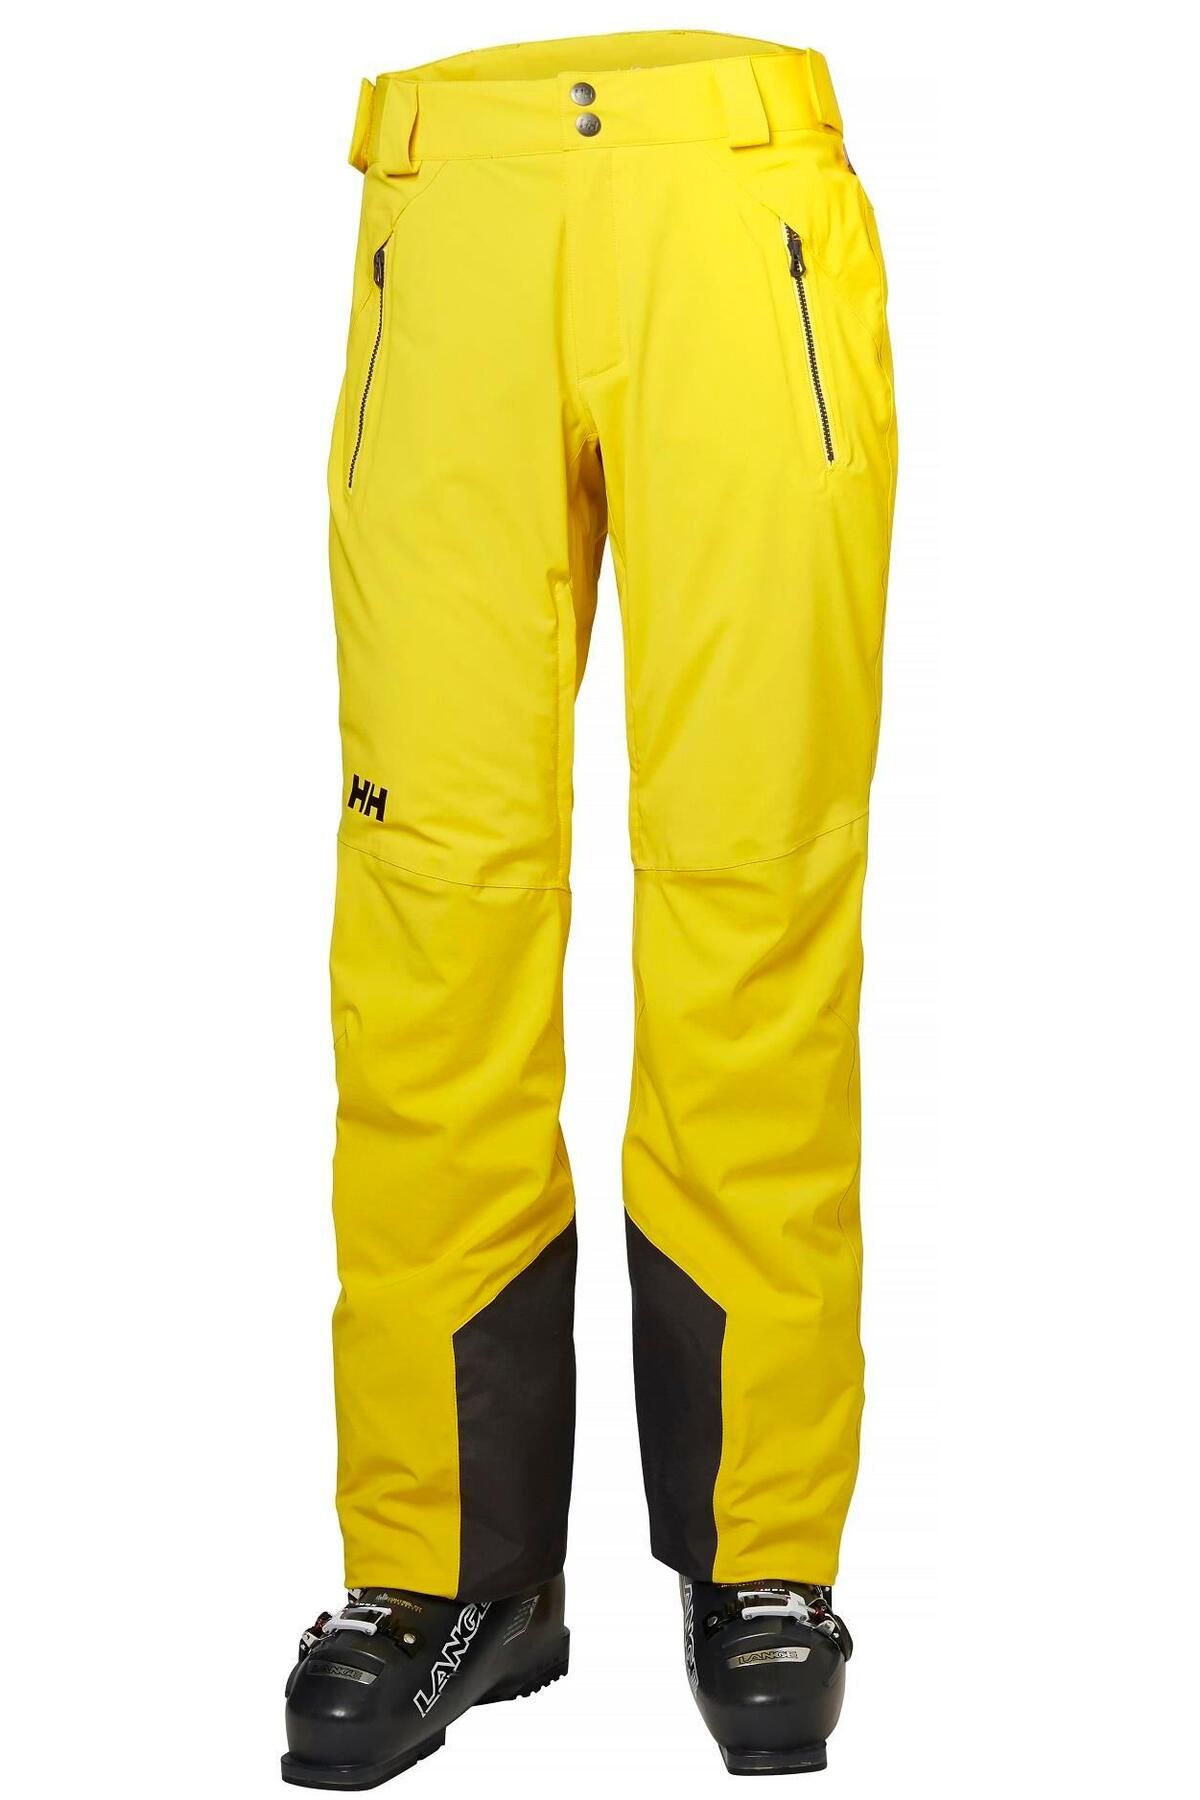 Helly Hansen Hh Force Pant